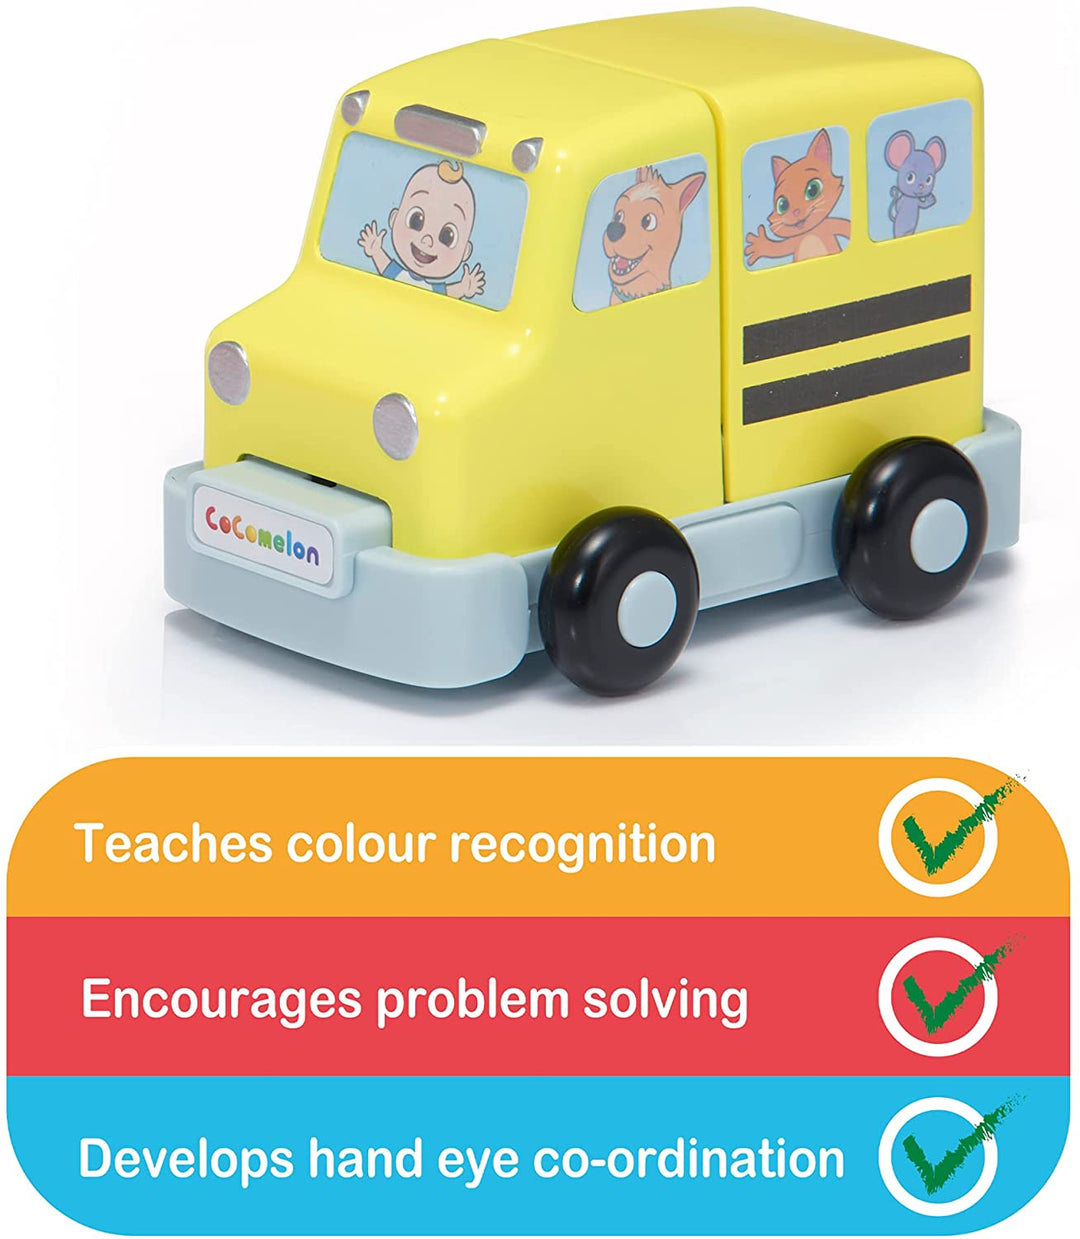 WOW! STUFF Build Musical Vehicles CoComelon JJ School Bus Fire Engine and Ice Cream Van | Sounds and Songs with Mystery Surprise Reveal | for Toddlers, Girls and Boys | Ages 2, 3, 4 and 5